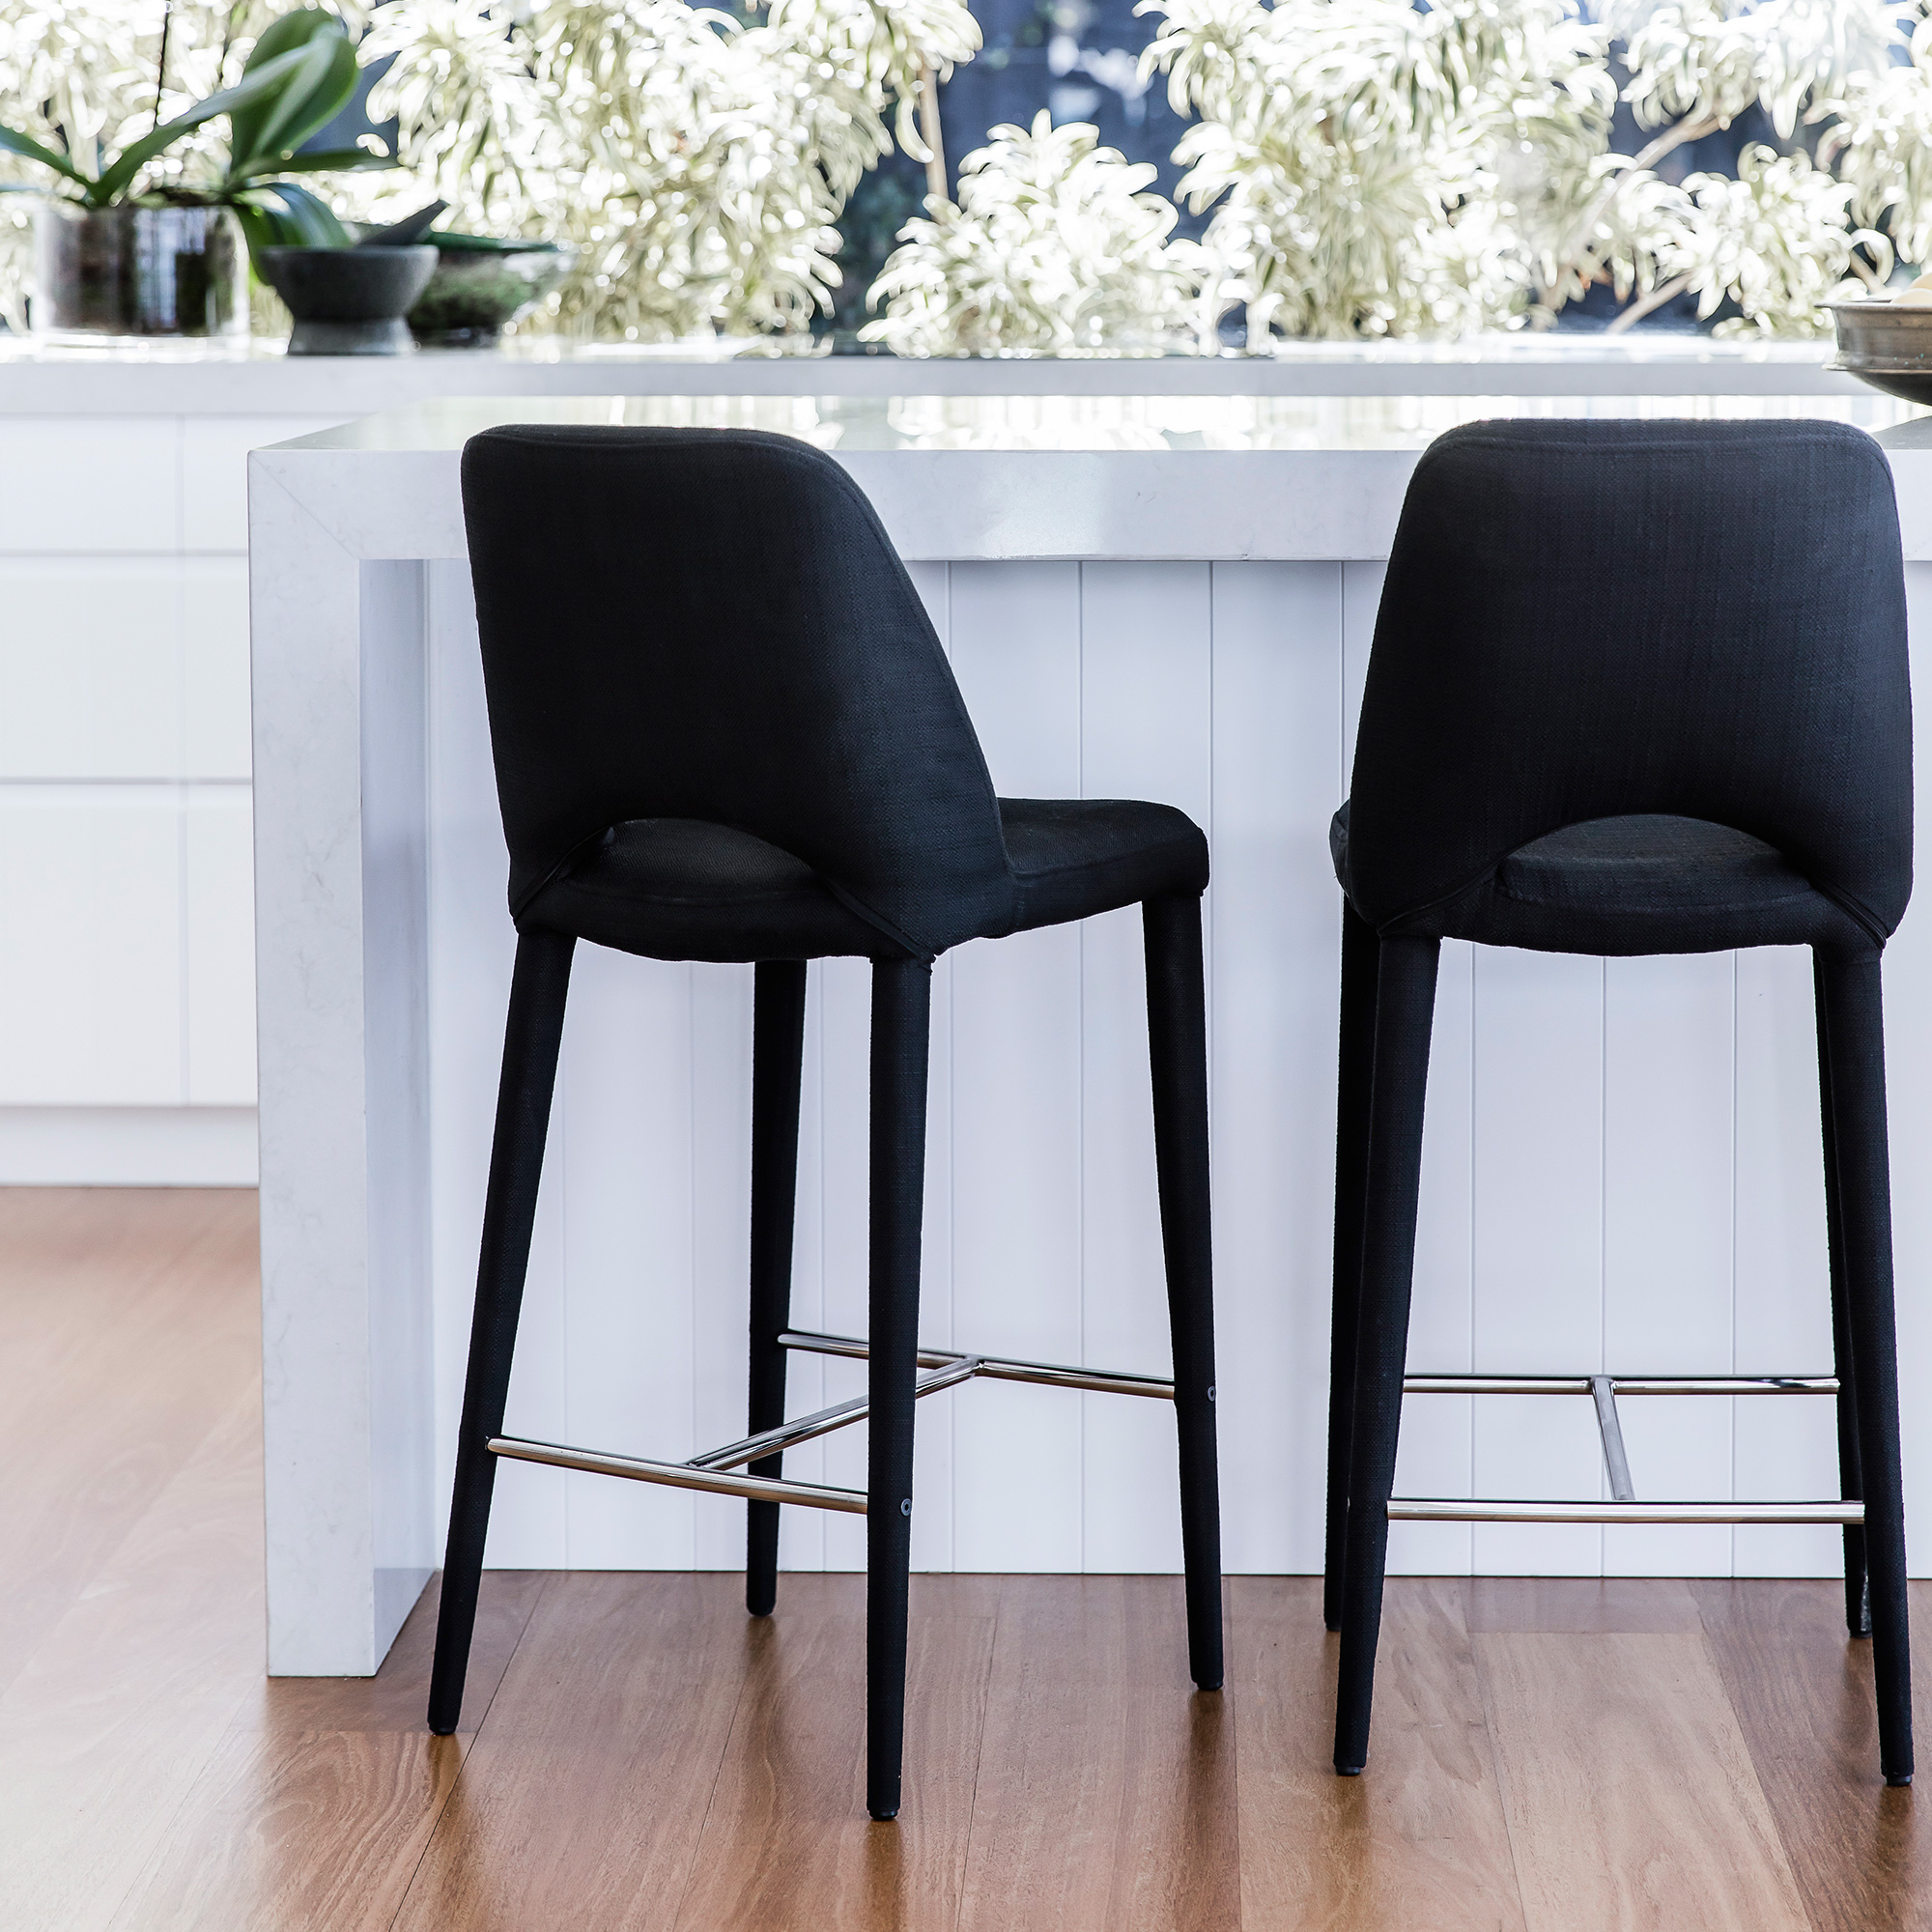 5 Velvet Bar Chairs That Won't Get Out of Your Head Until You Buy Them